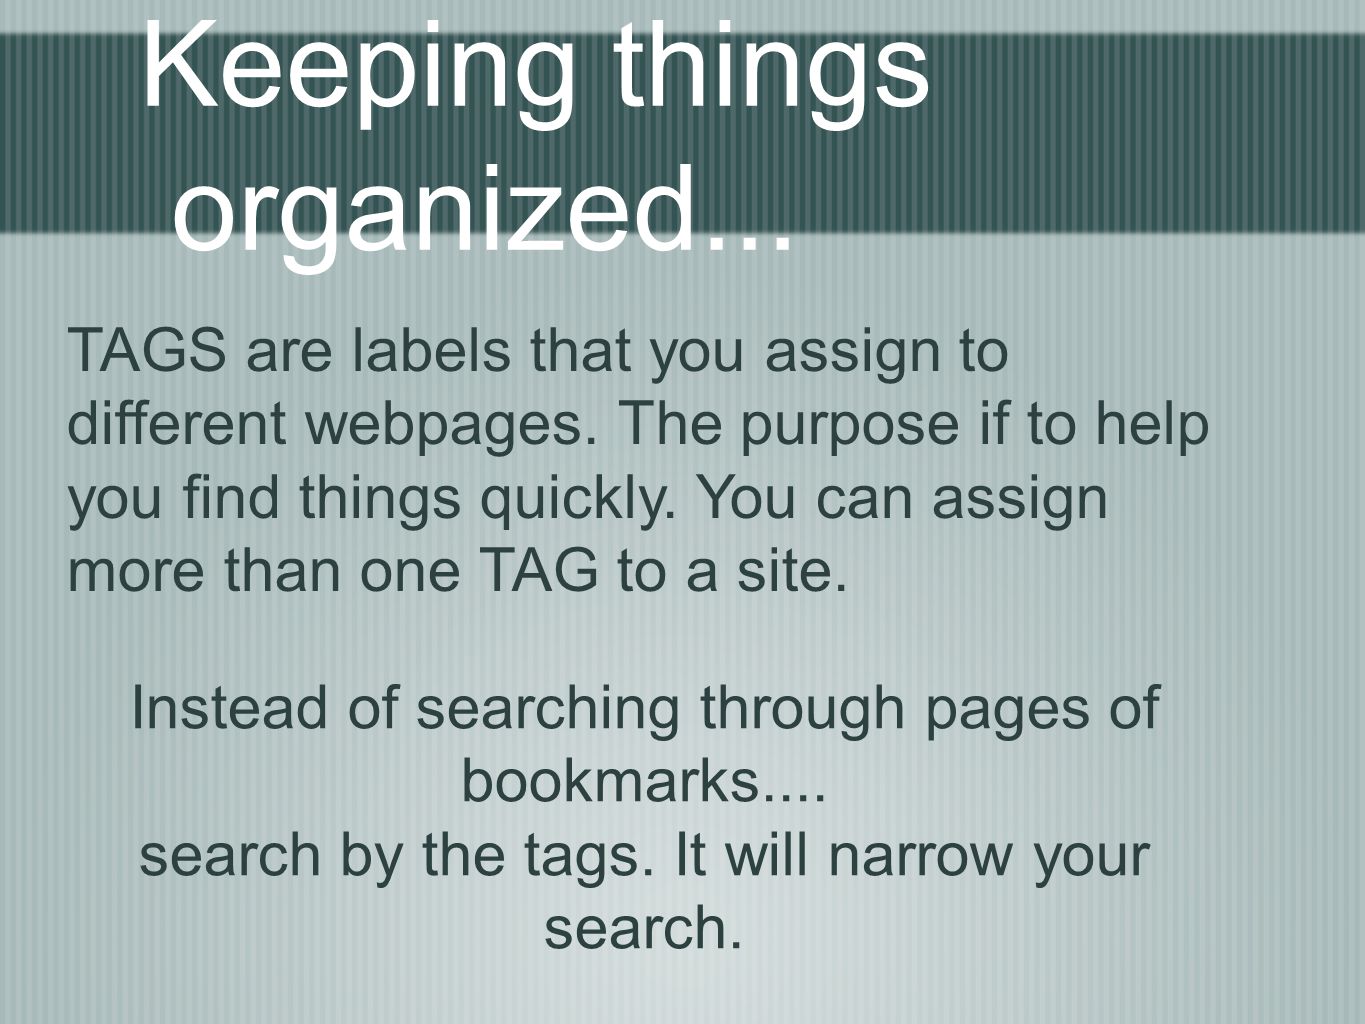 Keeping things organized... TAGS are labels that you assign to different webpages.